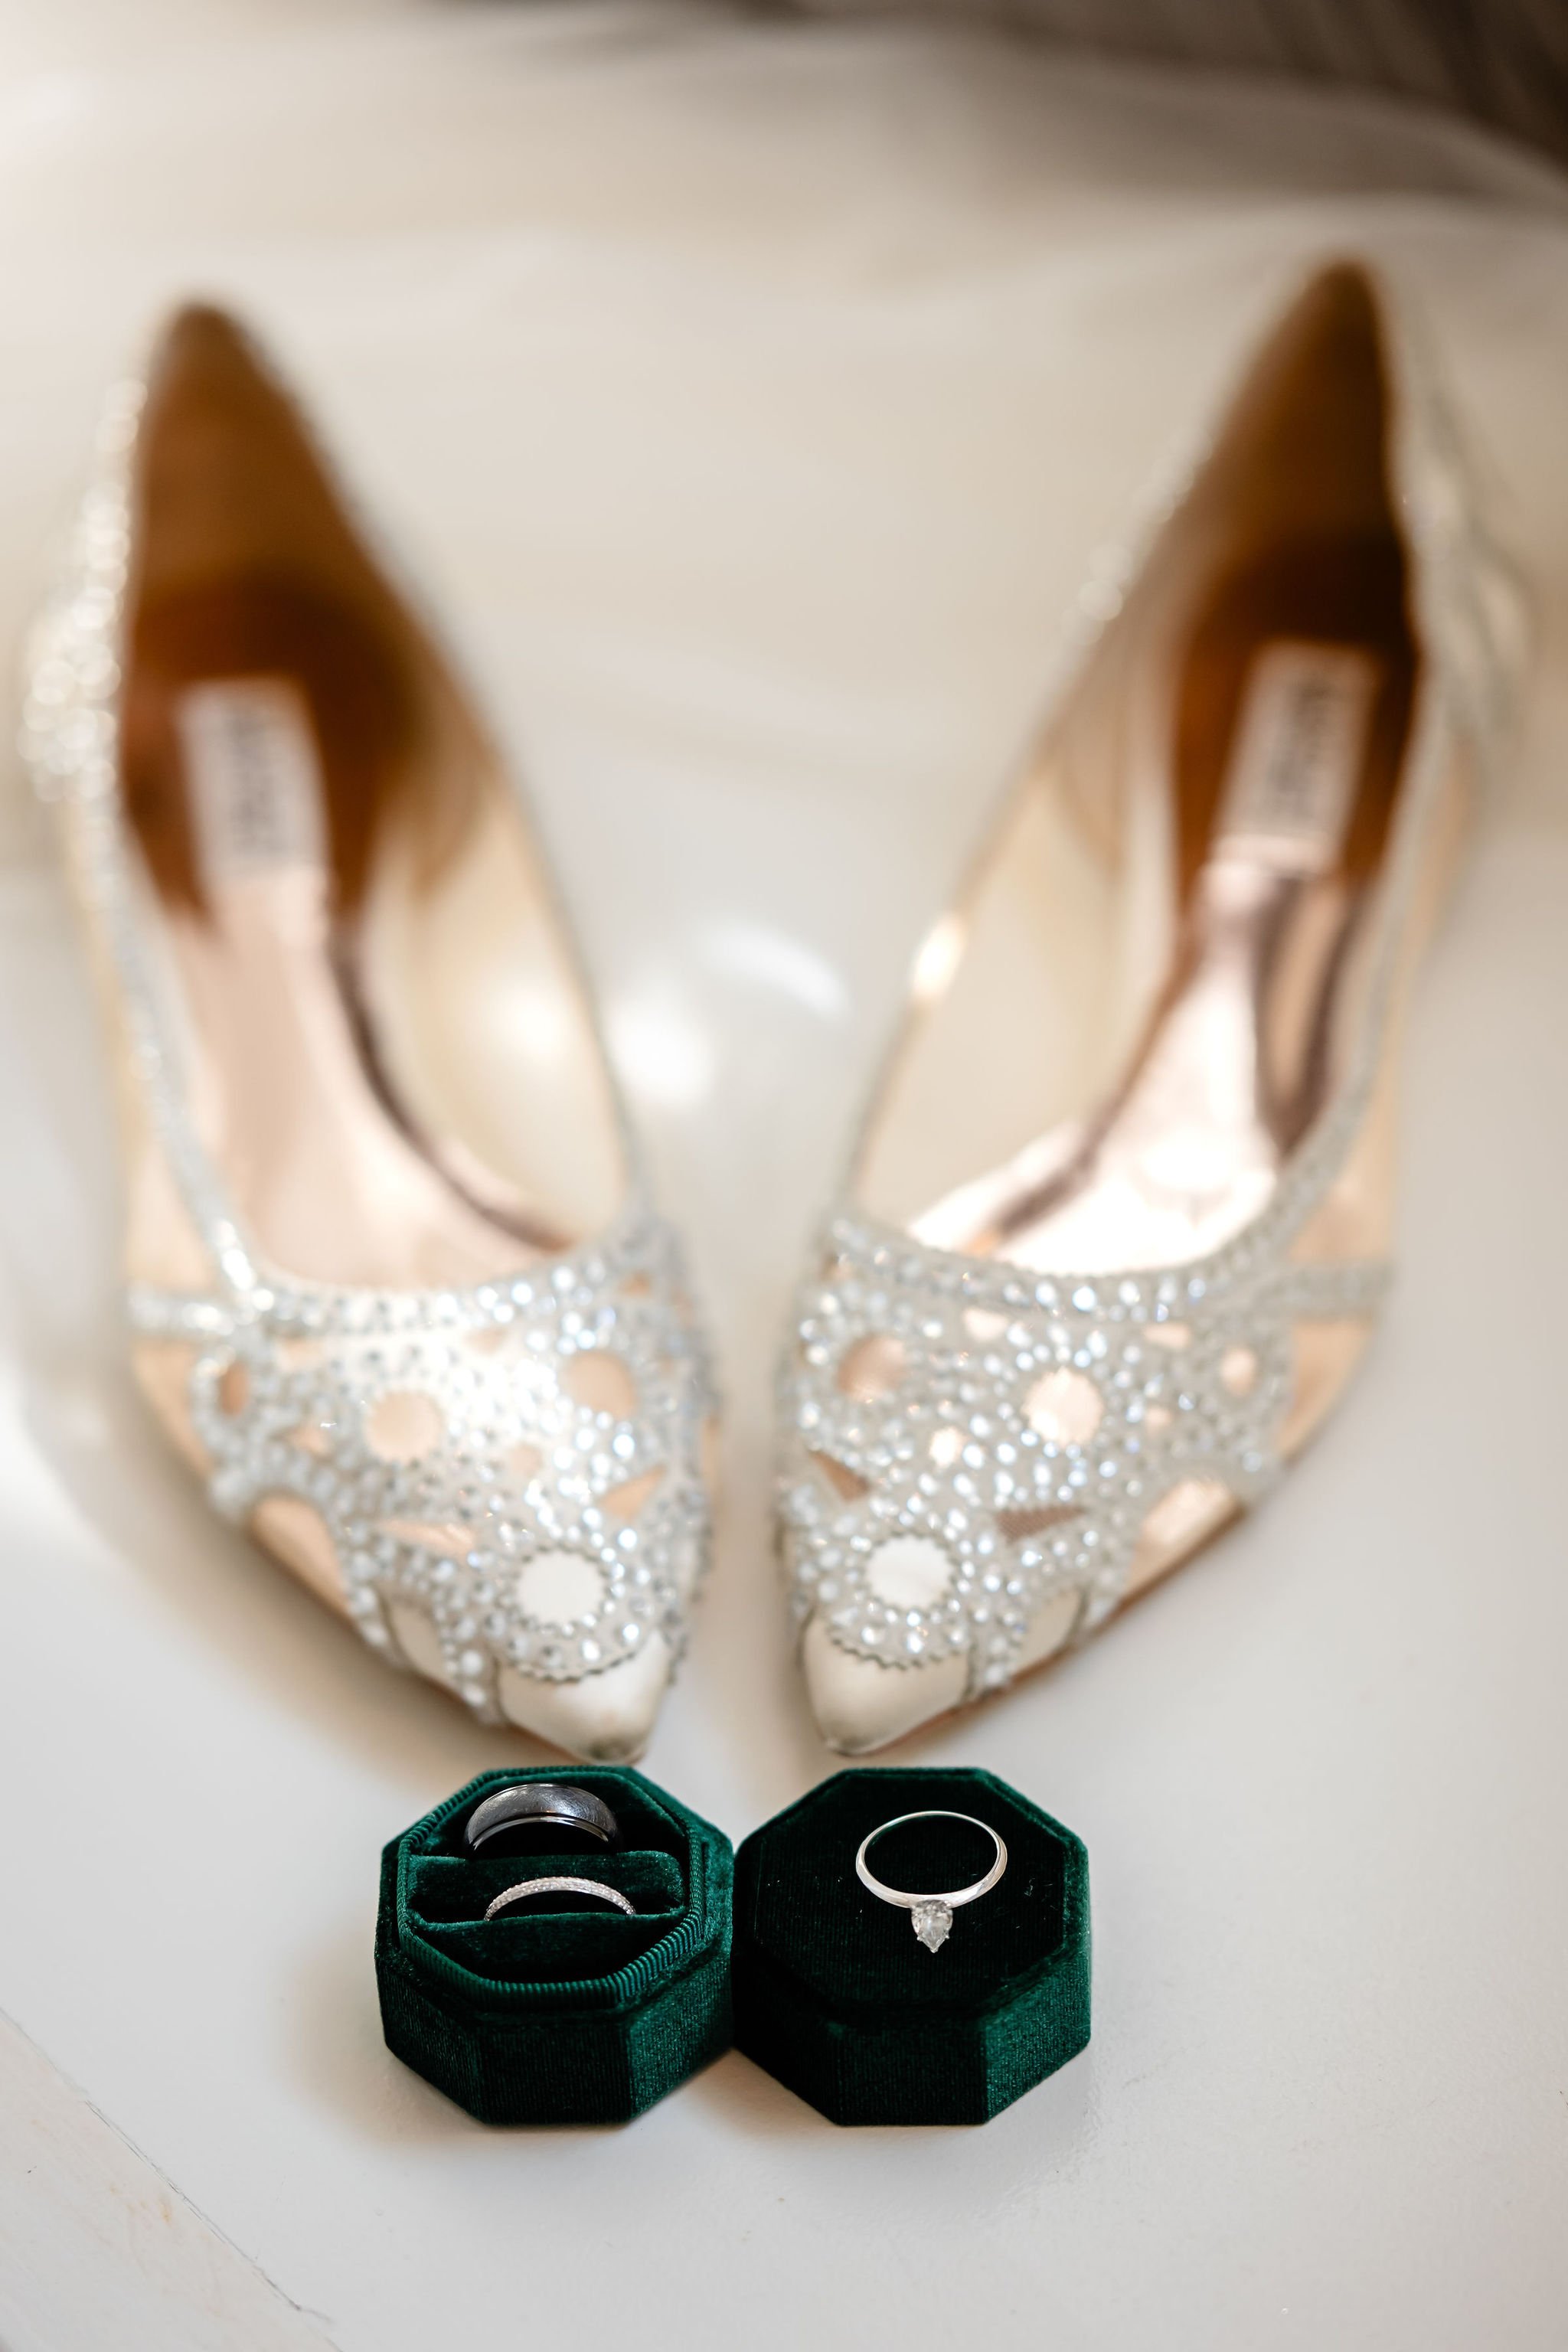 wedding details - shoes and wedding rings